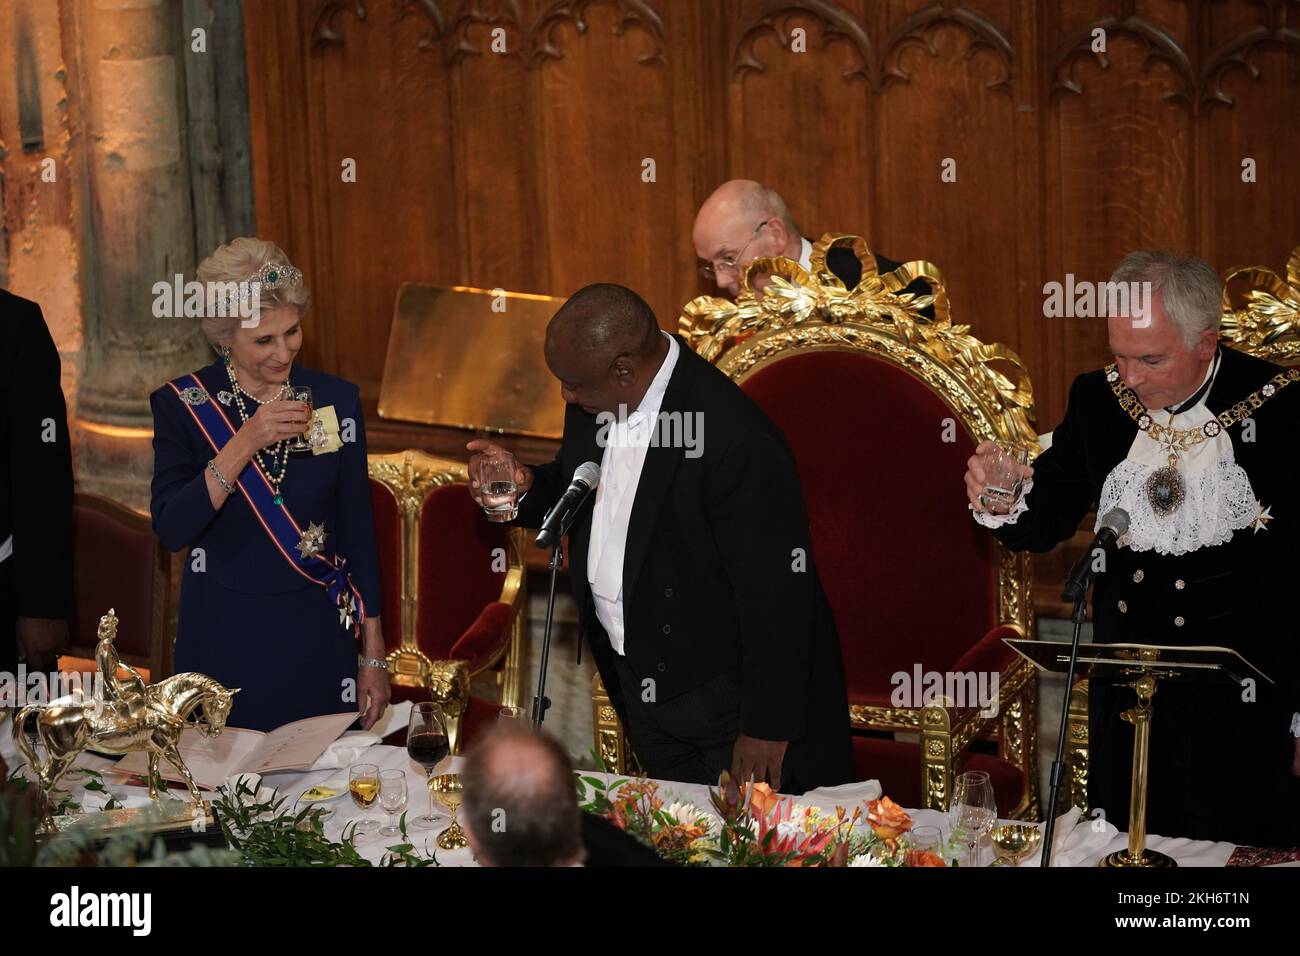 President Cyril Ramaphosa of South Africa, raises a toast to the Duchess of Gloucester and the Lord Mayor of London, Nicholas Lyons (right) during a banquet at the Guildhall in London, given by the Lord Mayor and City of London Corporation, during his state visit to the UK. Picture date: Wednesday November 23, 2022. Stock Photo